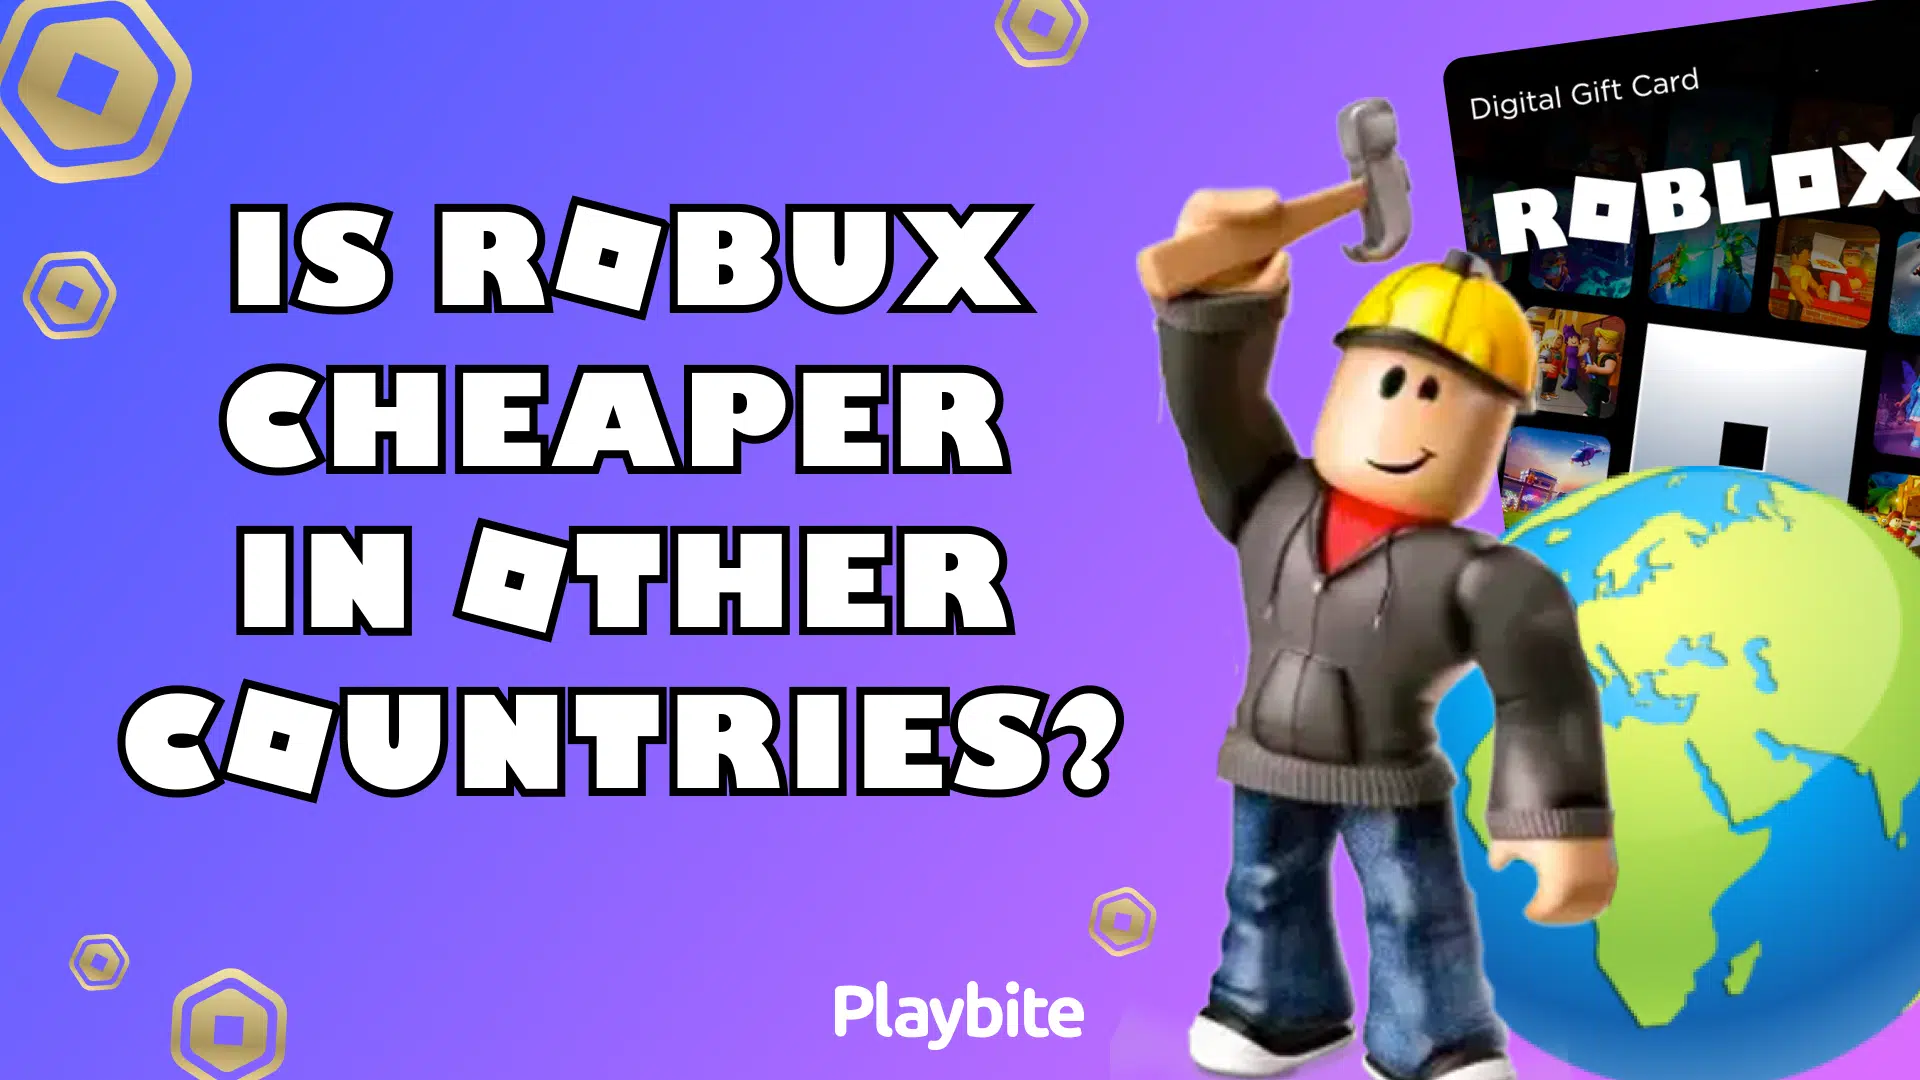 Is Robux Cheaper In Other Countries?